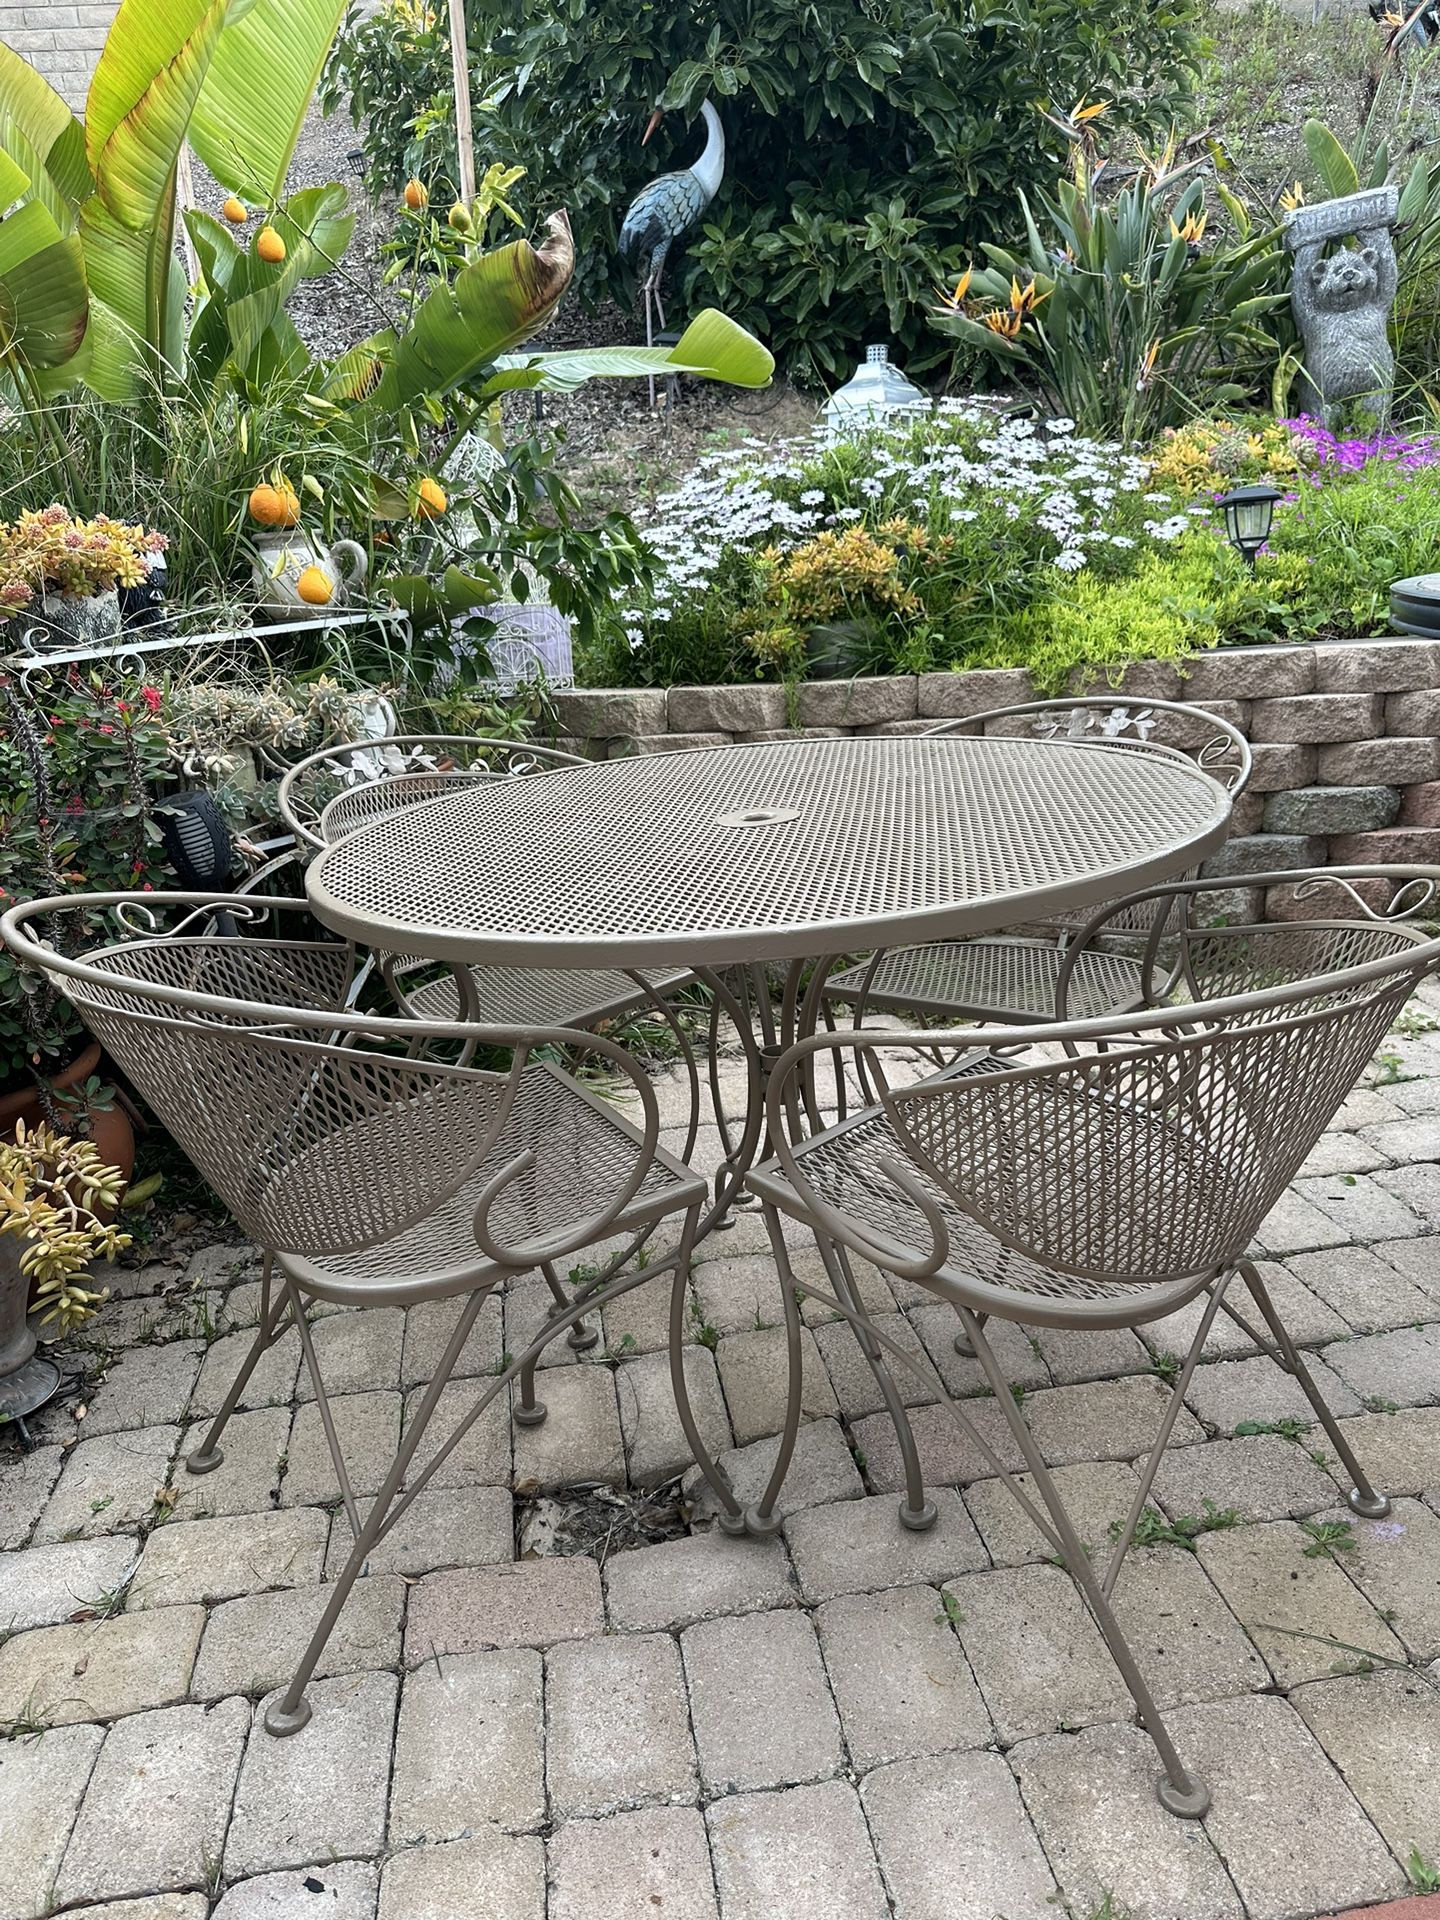 Vintage Wrought Iron Patio/outdoor Furniture Table Set! Delivery Available For Extra Fee. 